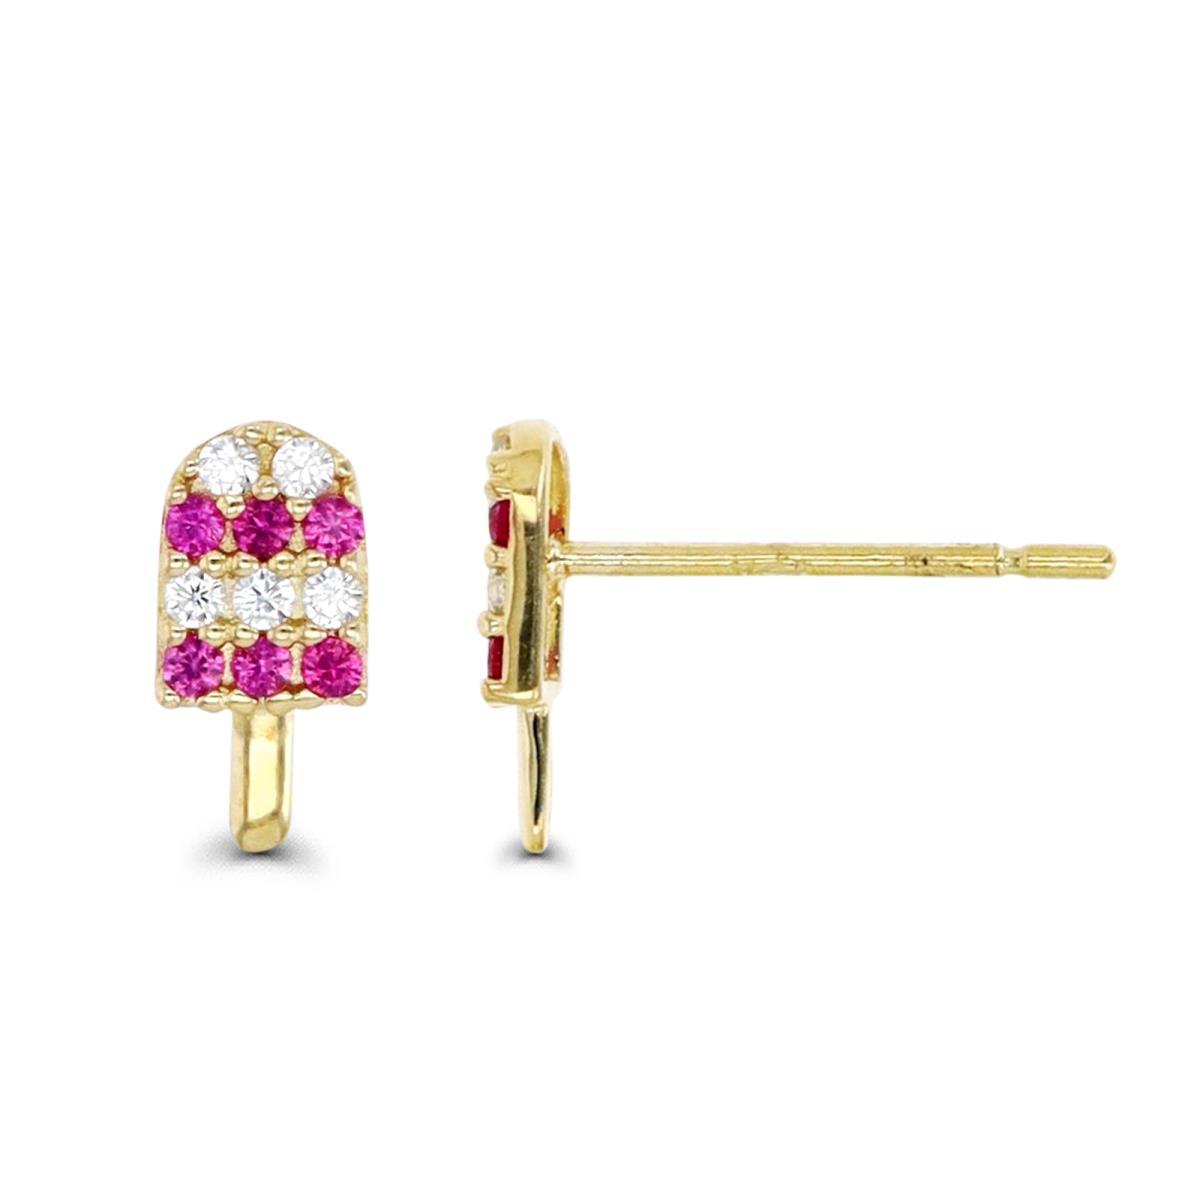 10K Gold Yellow & Red and White CZ Popsicle Stud Earring